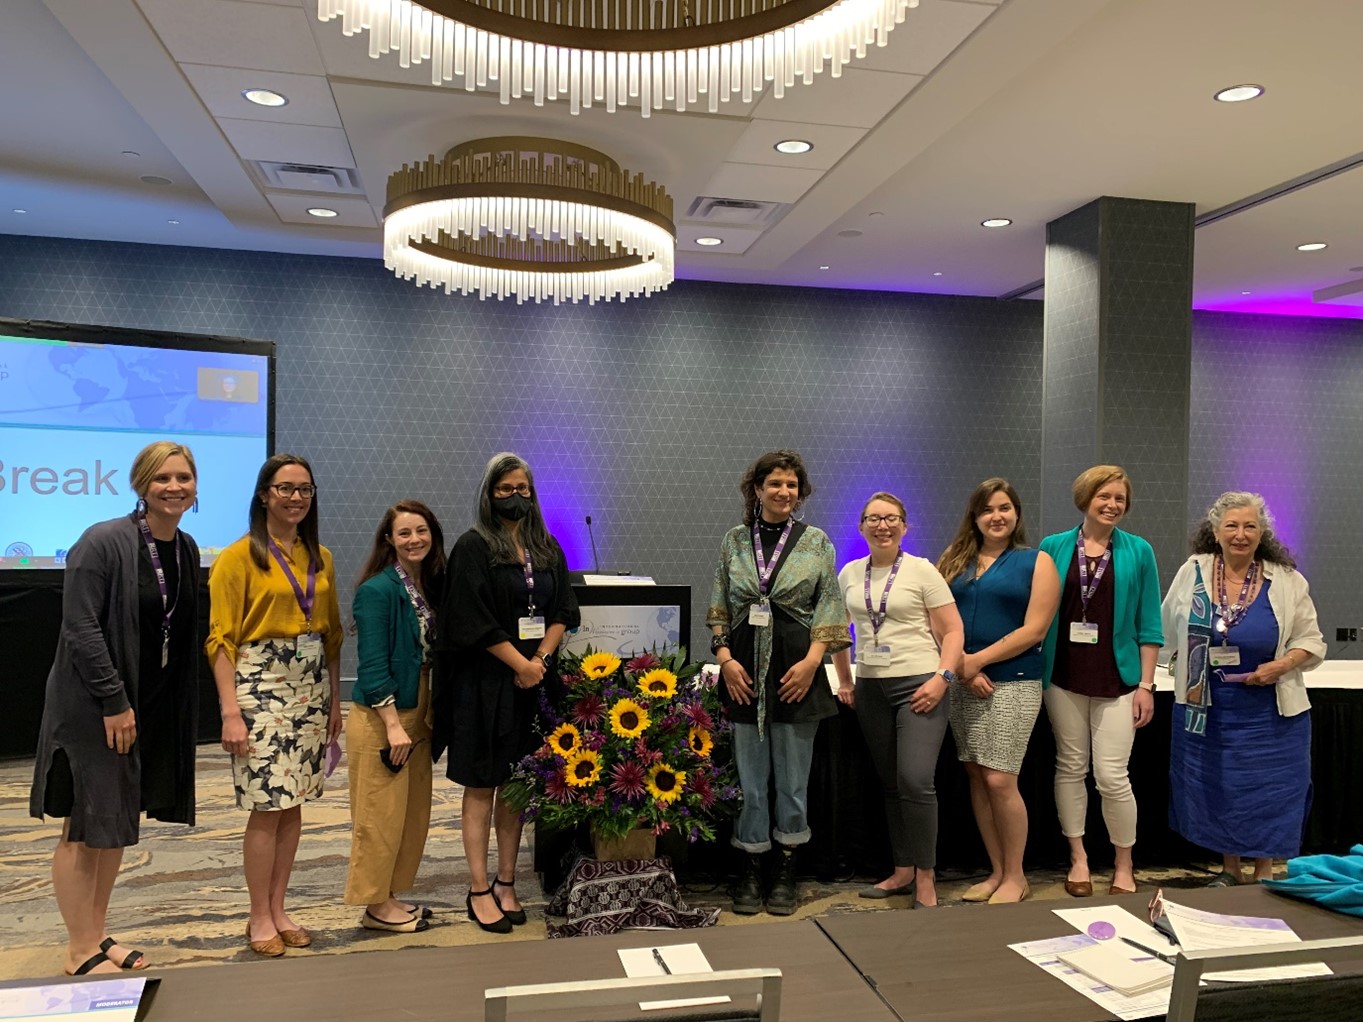 Pictured above are students and early-career investigators who were selected to receive competitive travel awards based on their submitted abstracts. Not all 15 awardees were able to attend in-person, but overall, the awardees represented seven different countries.